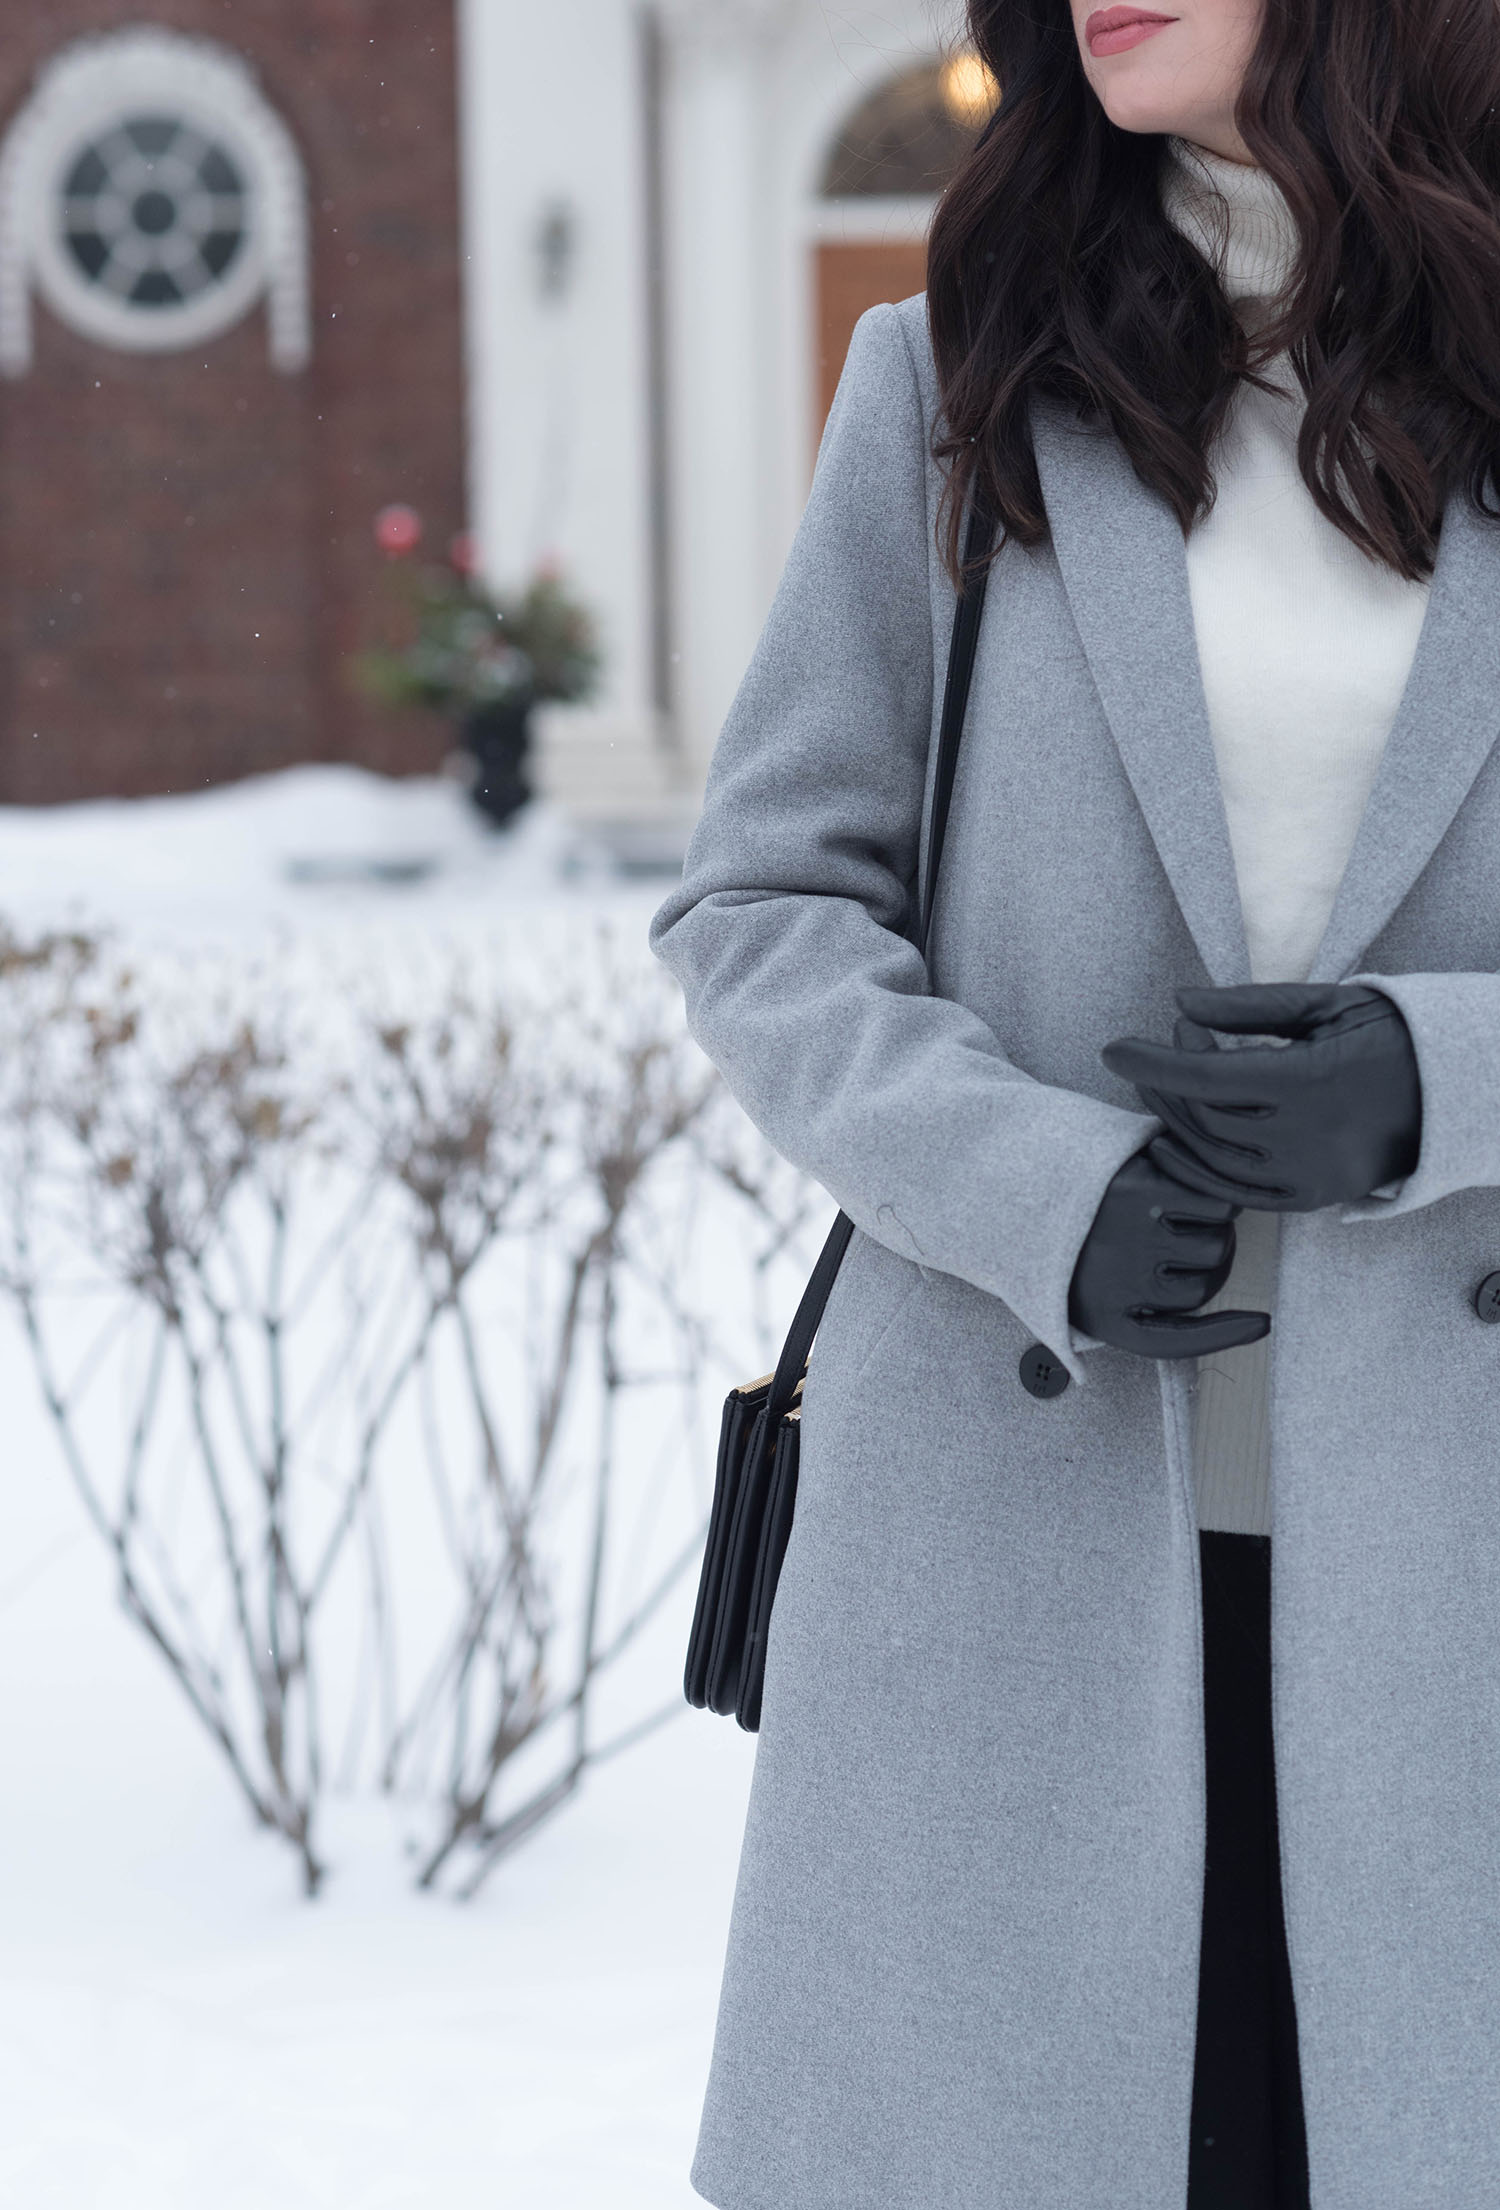 Outfit details on Winnipeg fashion blogger Coco & Vera, including a Celine trio bag and Zara coat